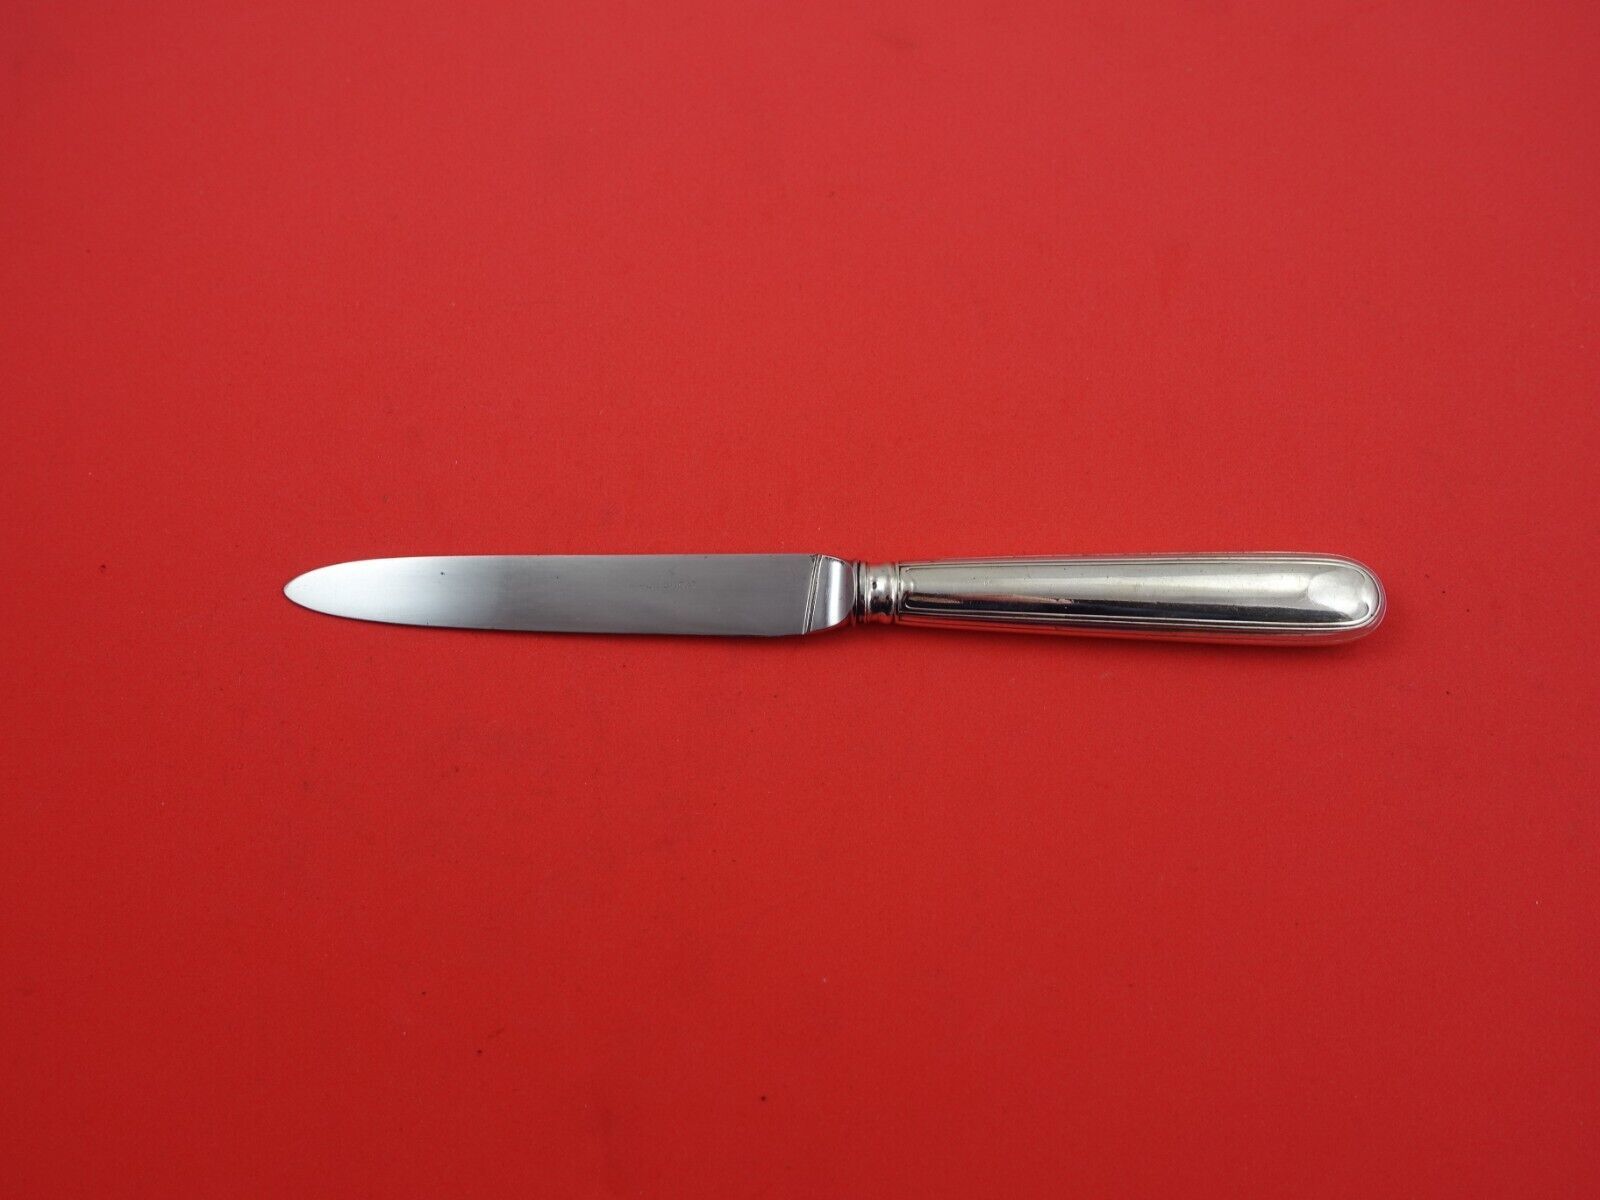 Primary image for Consulat By Puiforcat Silverplate Dessert Knife pointed stainless blade 8 1/8"